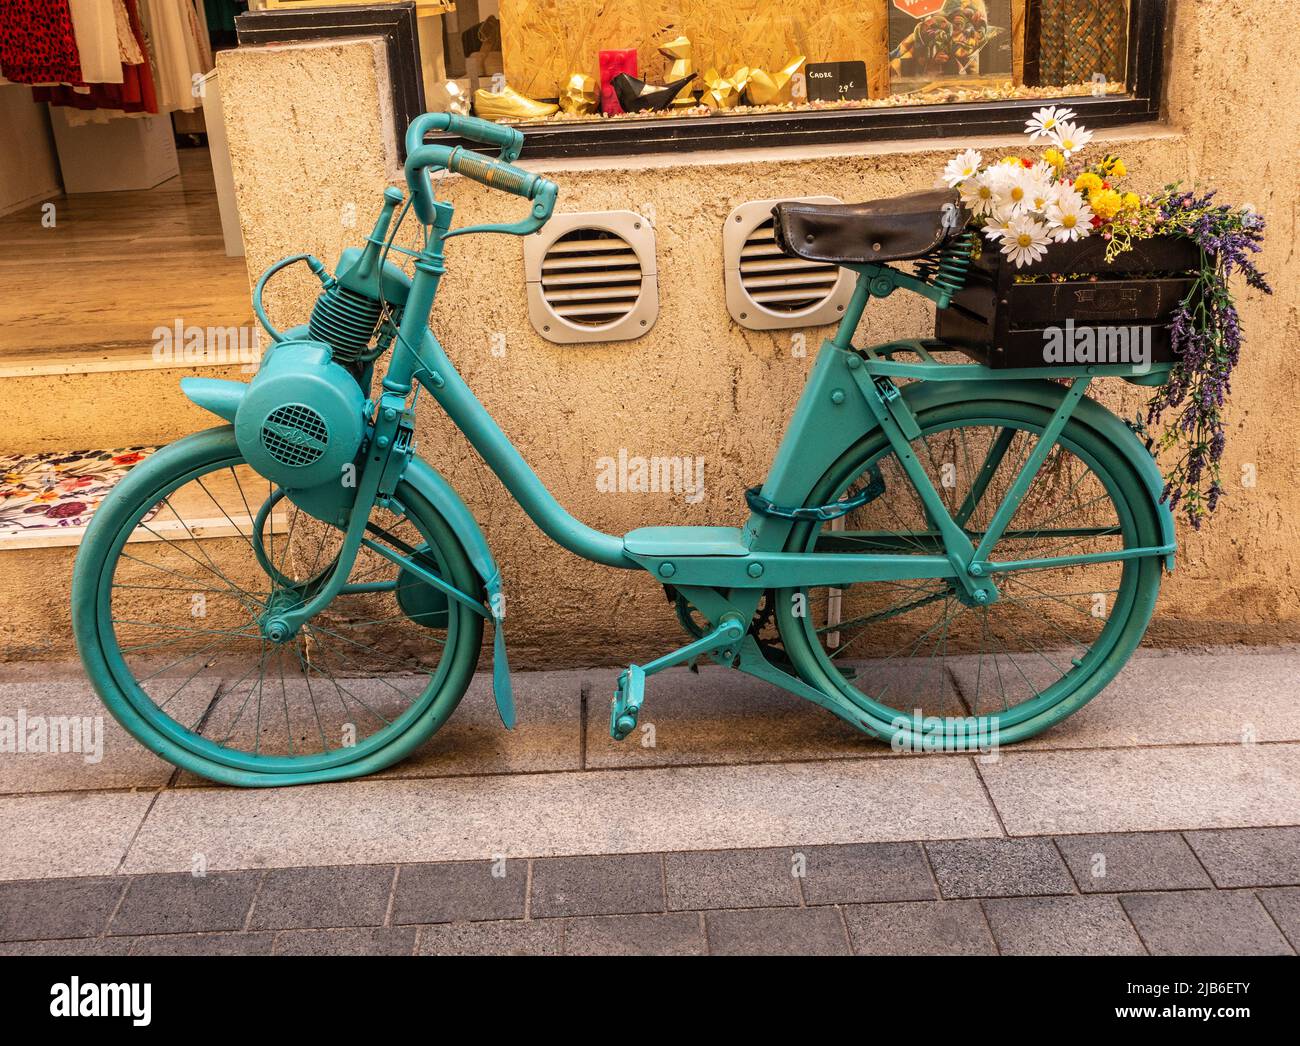 Antique Solex moped, velo on display in Beziers, France Stock Photo